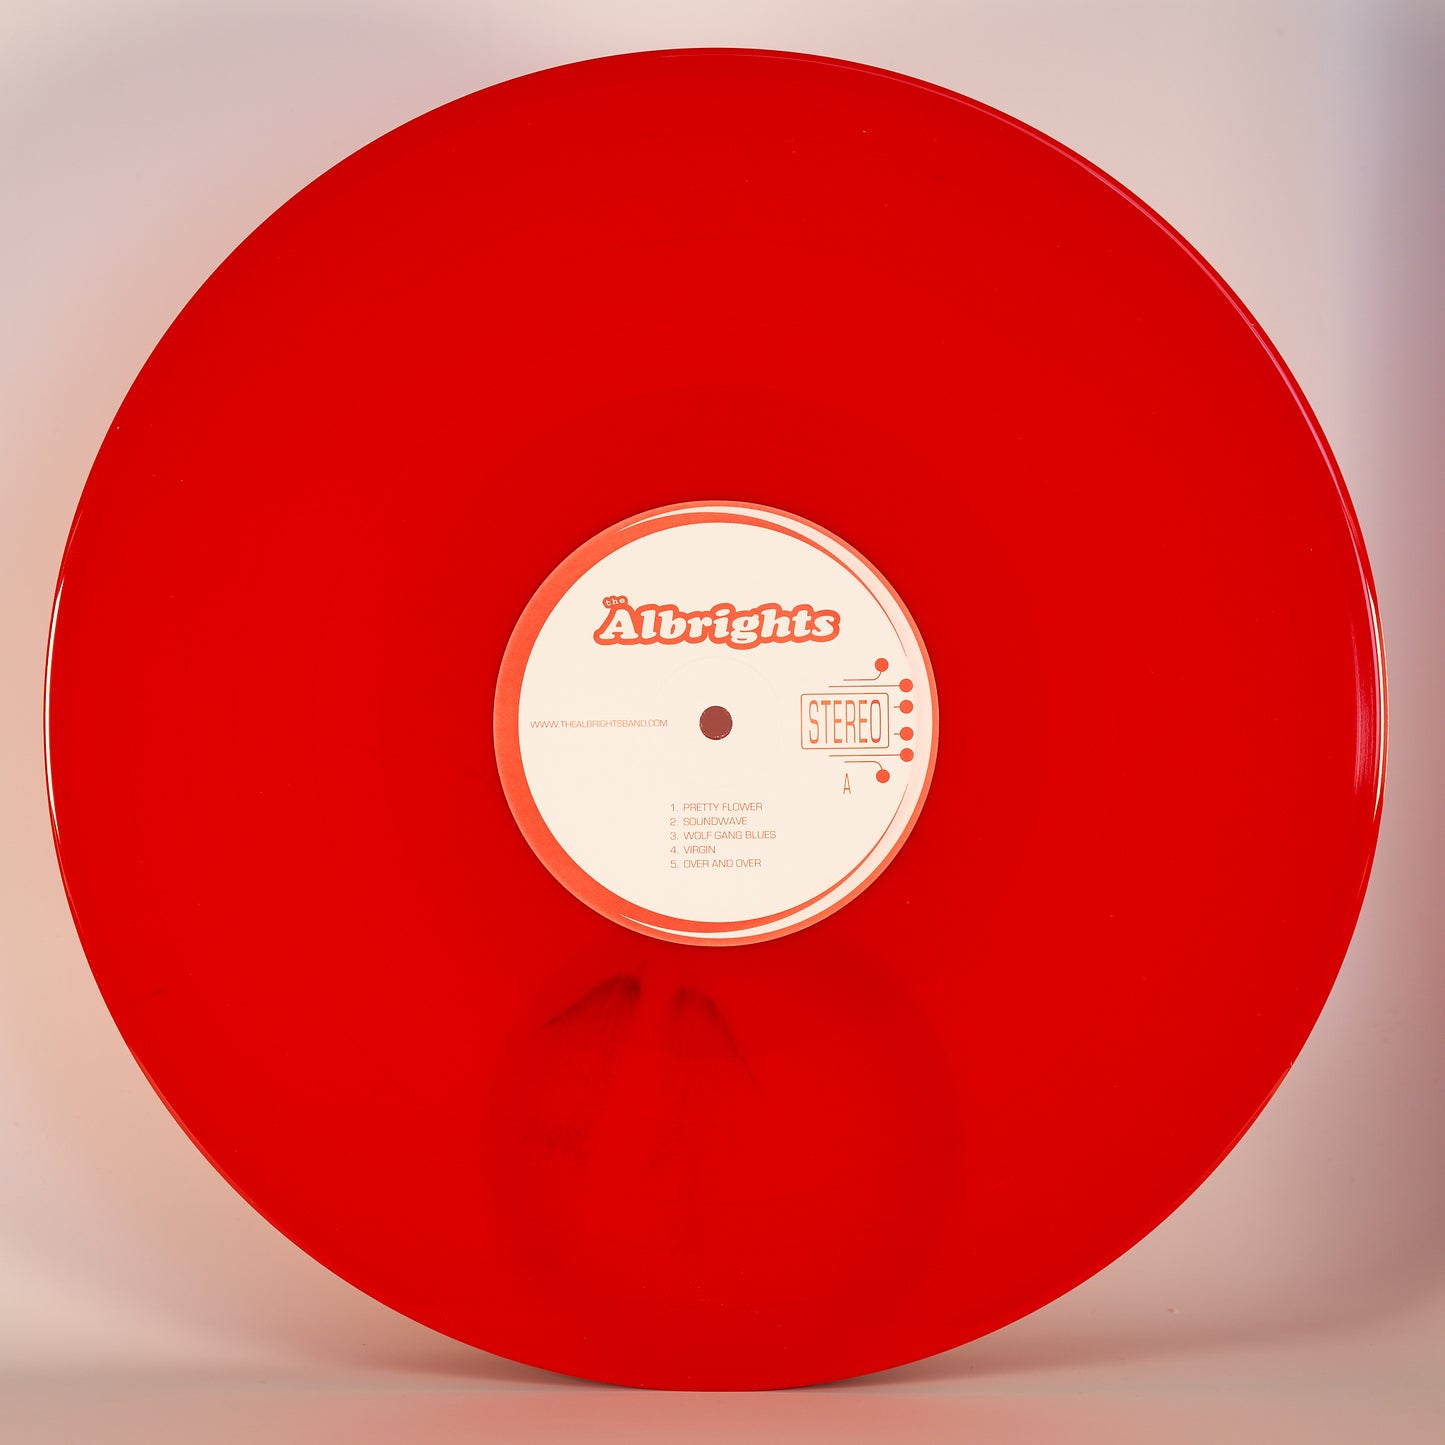 The Albrights  Red Vinyl